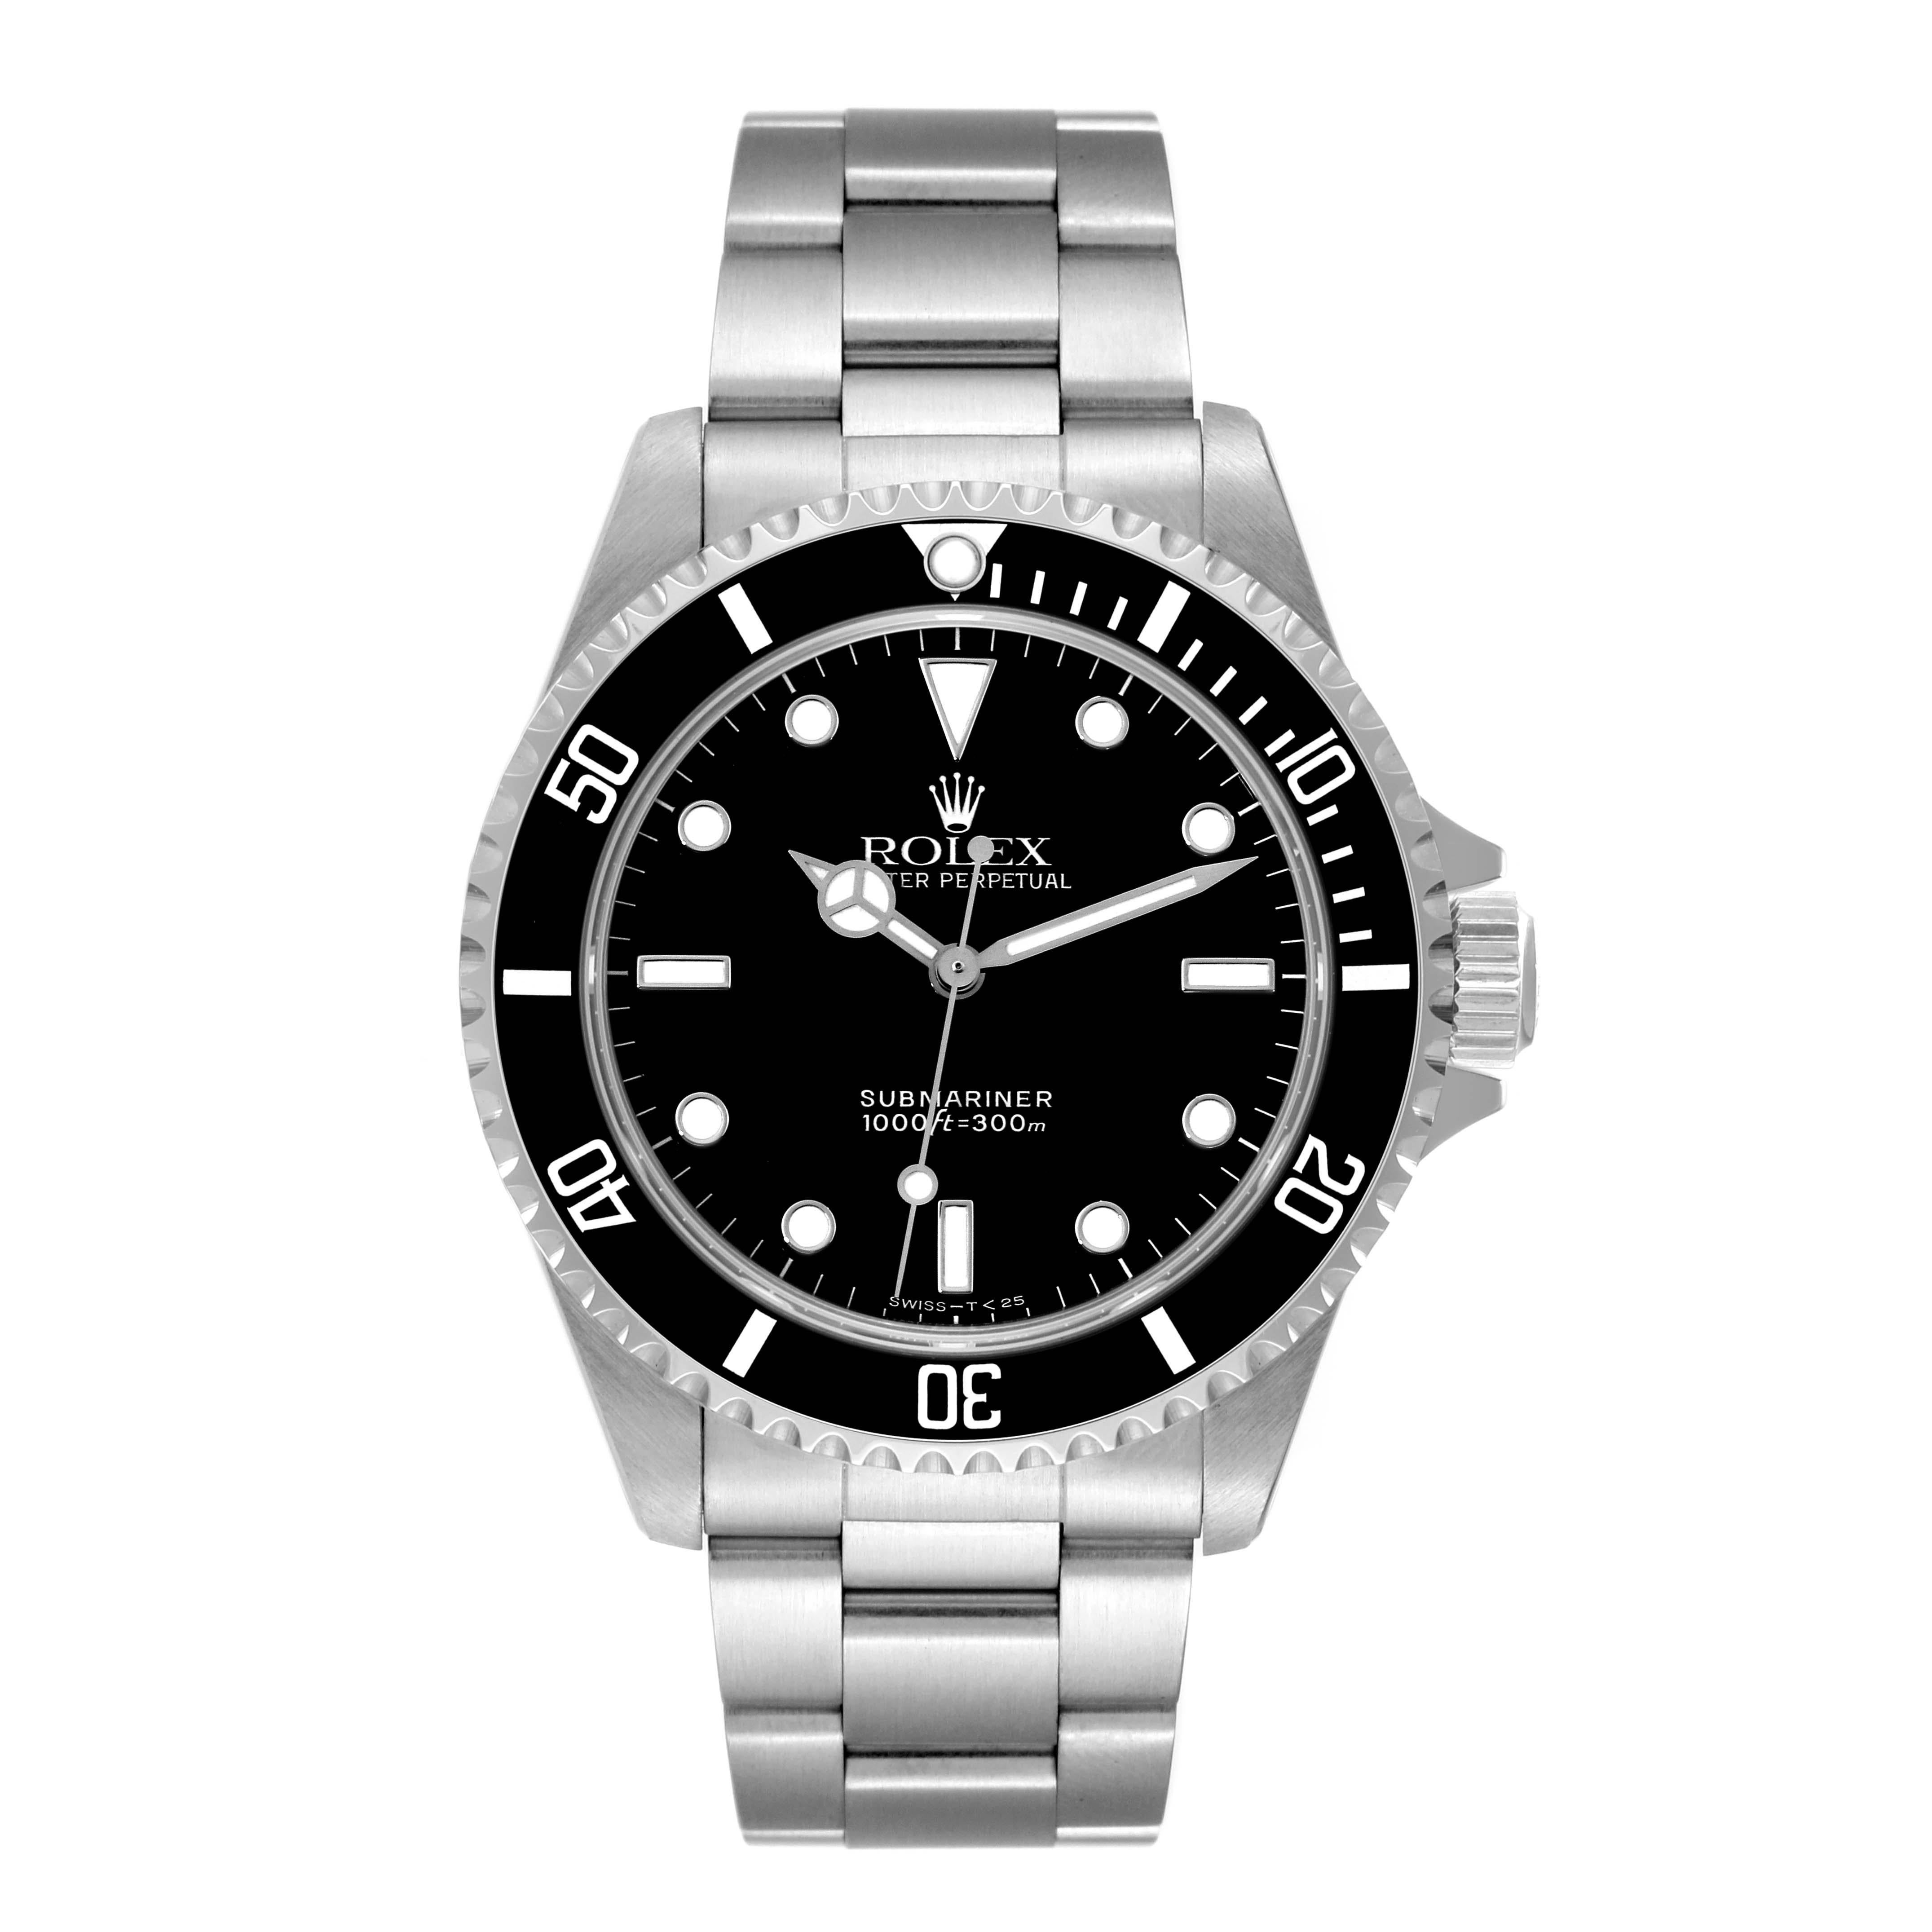 Rolex Submariner No Date 40mm 2 Liner Steel Mens Watch 14060. Officially certified chronometer automatic self-winding movement. Stainless steel case 40.0 mm in diameter. Rolex logo on the crown. Special time-lapse unidirectional rotating bezel.